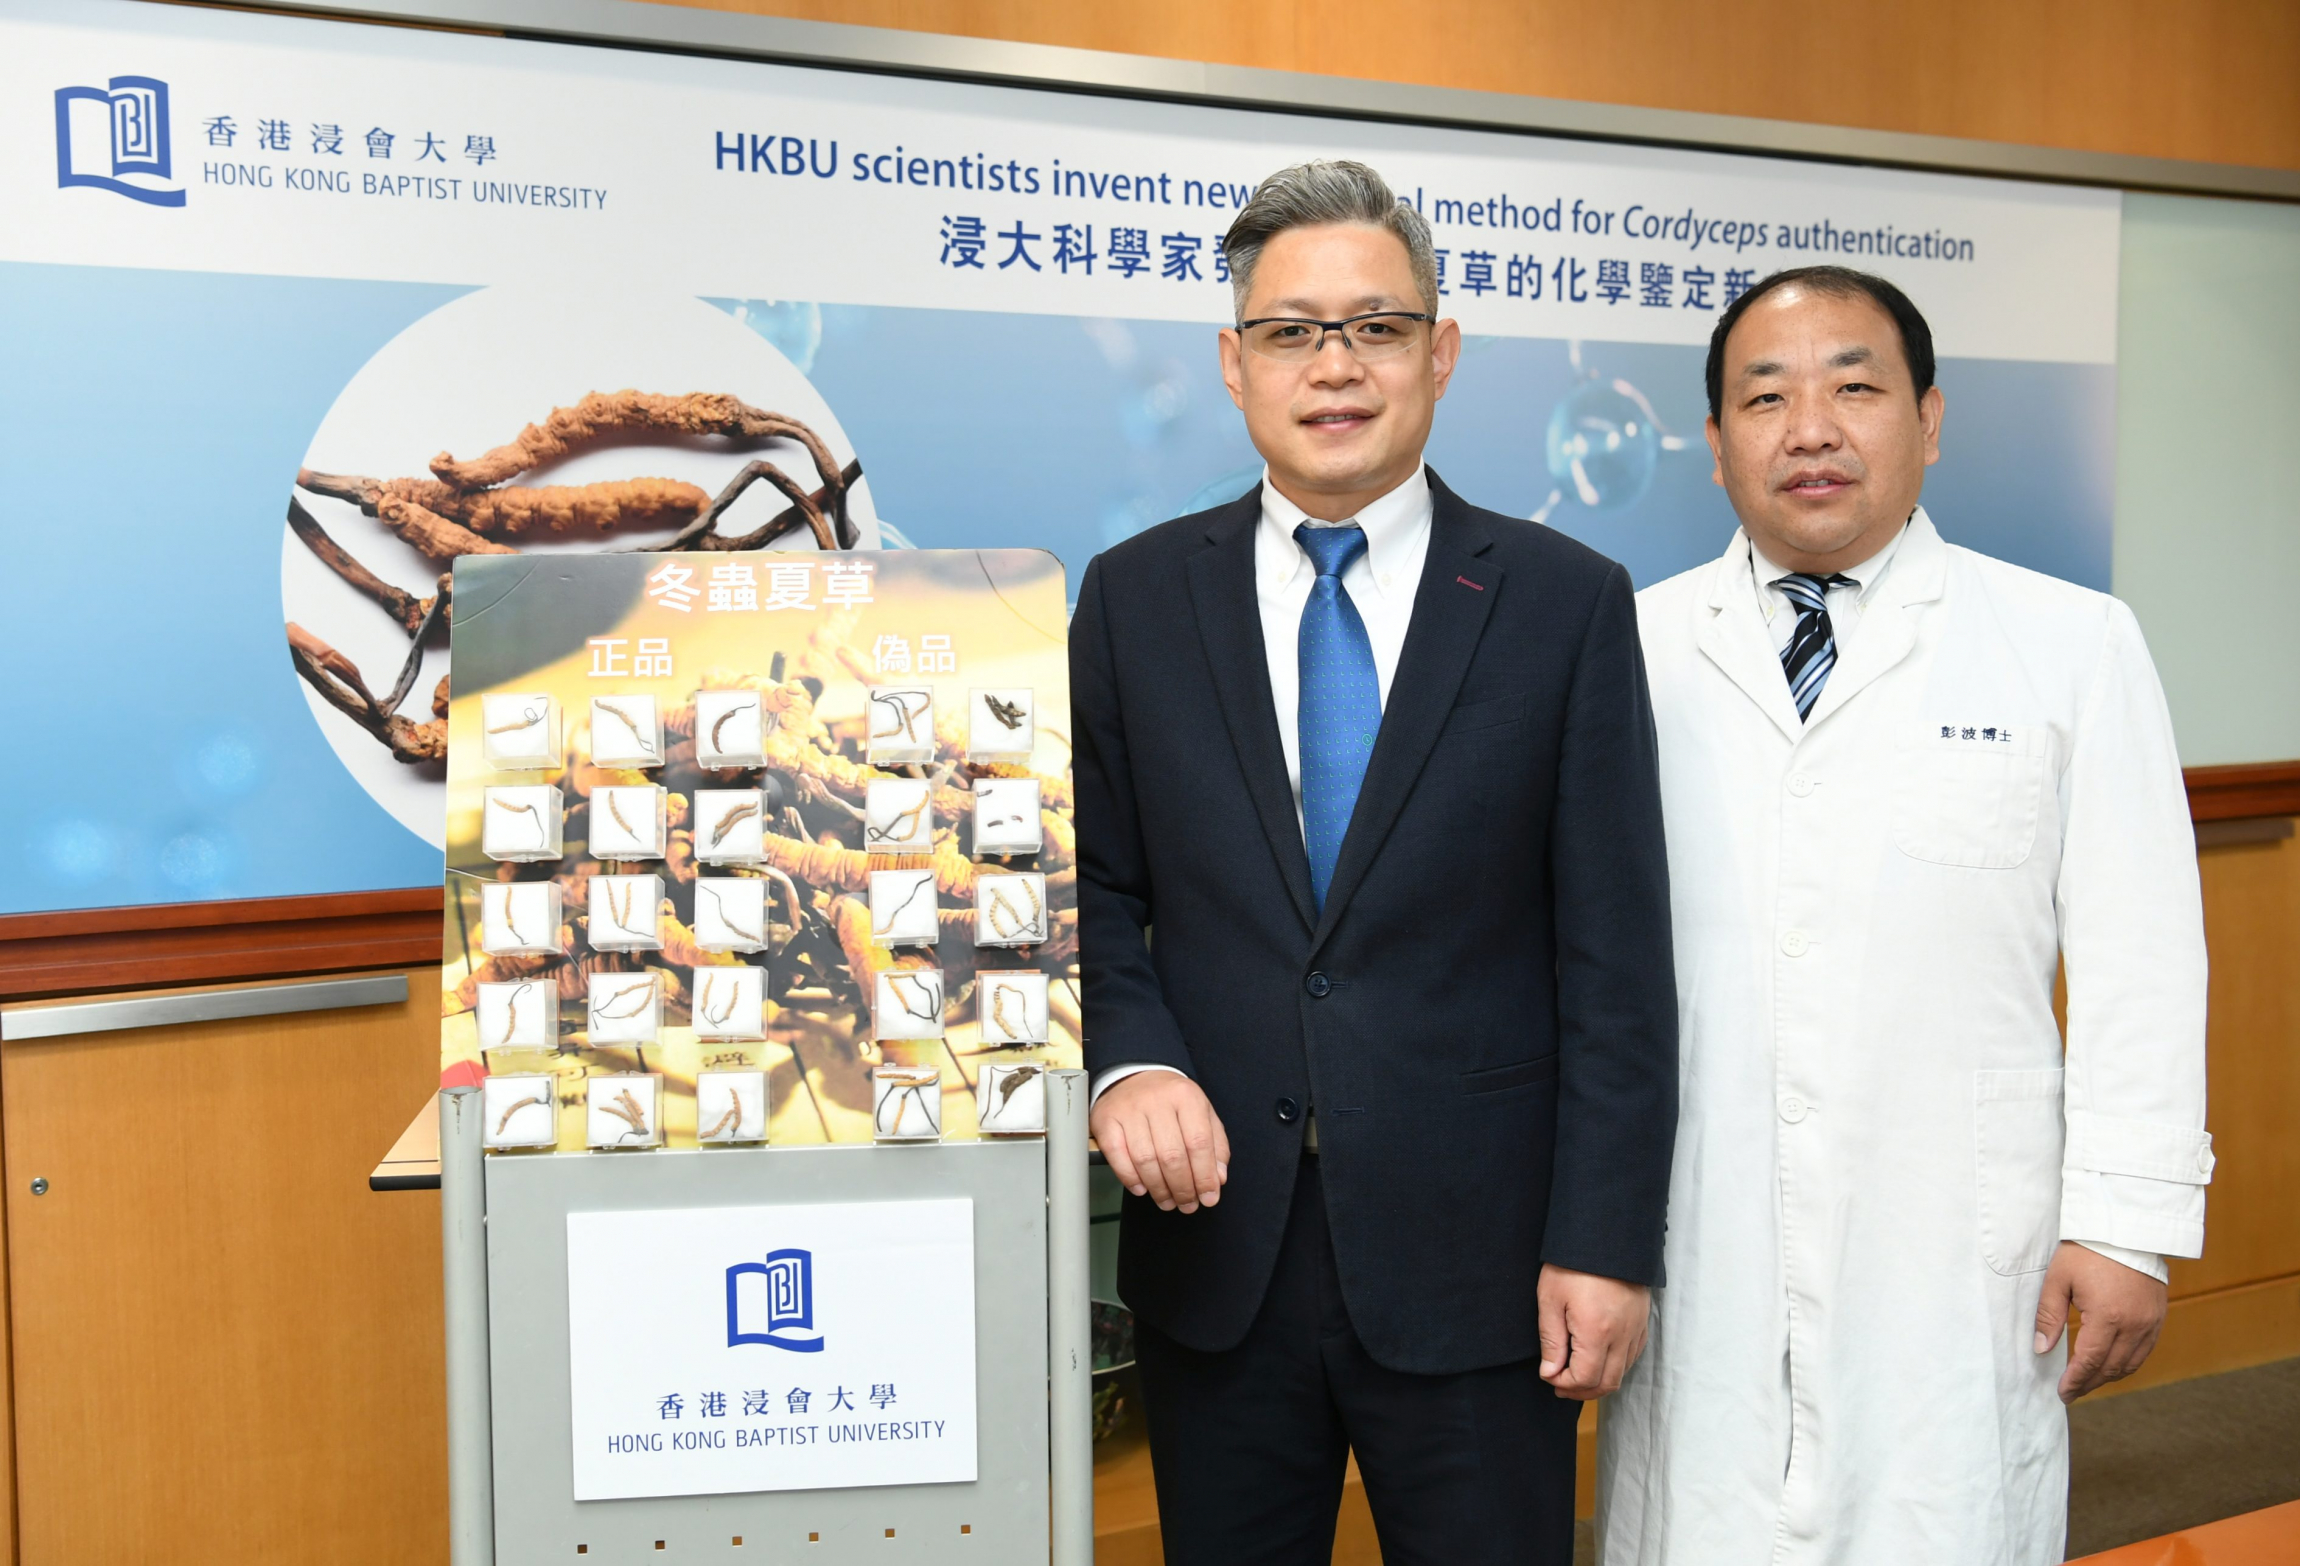 A Chinese medicine research team led by Dr Han Quanbin (left), Associate Professor of the School of Chinese Medicine at HKBU, has developed a polysaccharide marker authentication method for the qualitative and quantitative authentication of Cordyceps sinensis. Dr Peng Bo (right), Lecturer I of the Clinical Division of the School of Chinese Medicine at HKBU, said that Cordyceps sinensis has high medicinal and health care value.